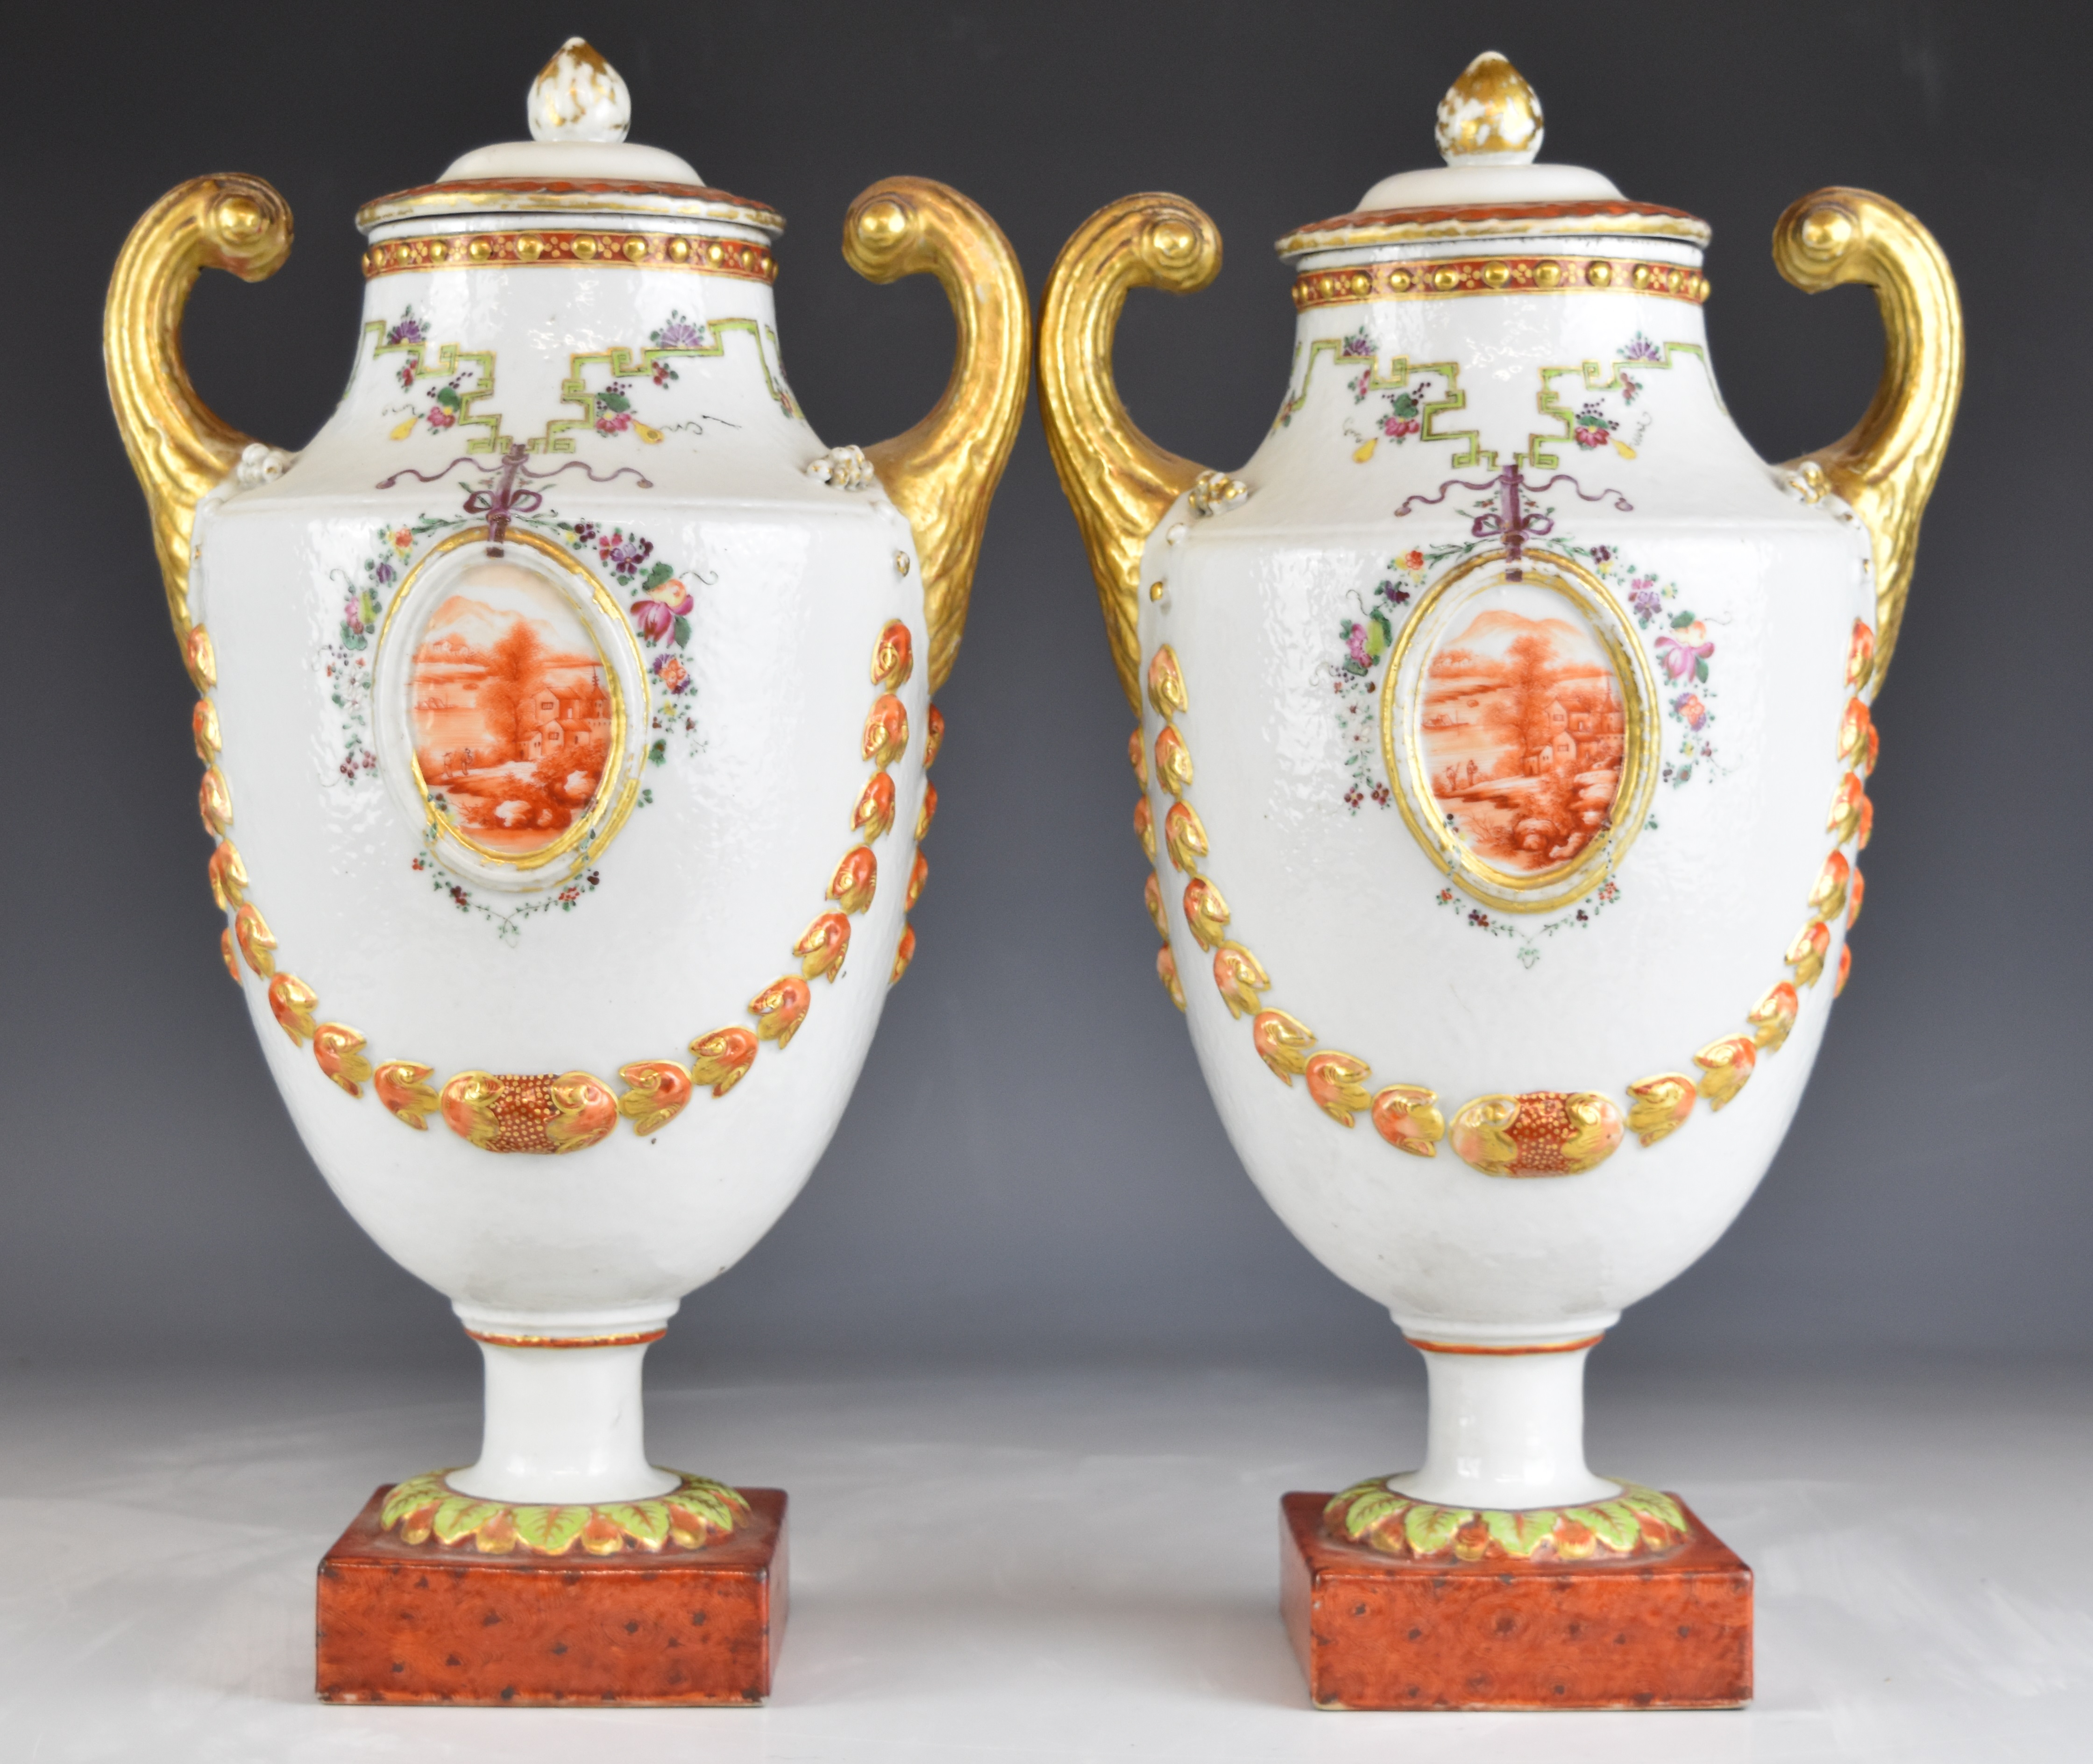 A pair of Chinese covered twin handled pedestal urns with relief moulded swags and landscape